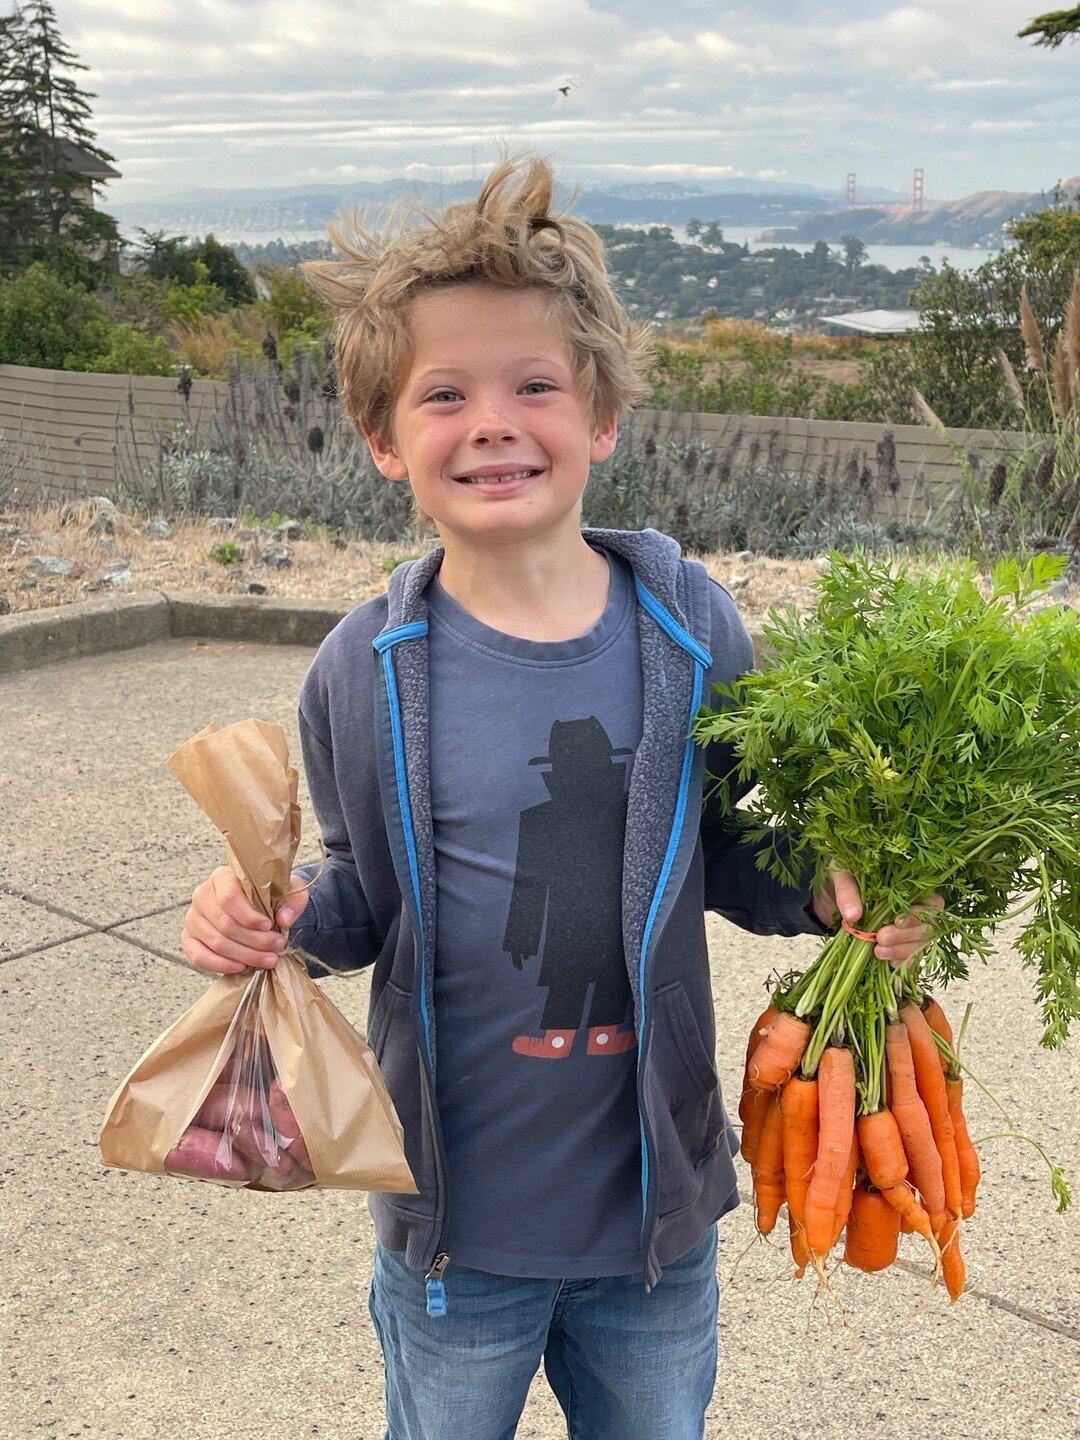 Crazy carrots, potatoes, and some serious bed head! 🤩​​​​​​​​
​​​​​​​​
Over the weekend we harvested more carrots and potatoes than we could use, so off to school they went. With a full kitchen in the classroom, the plan is to make roasted carrots a